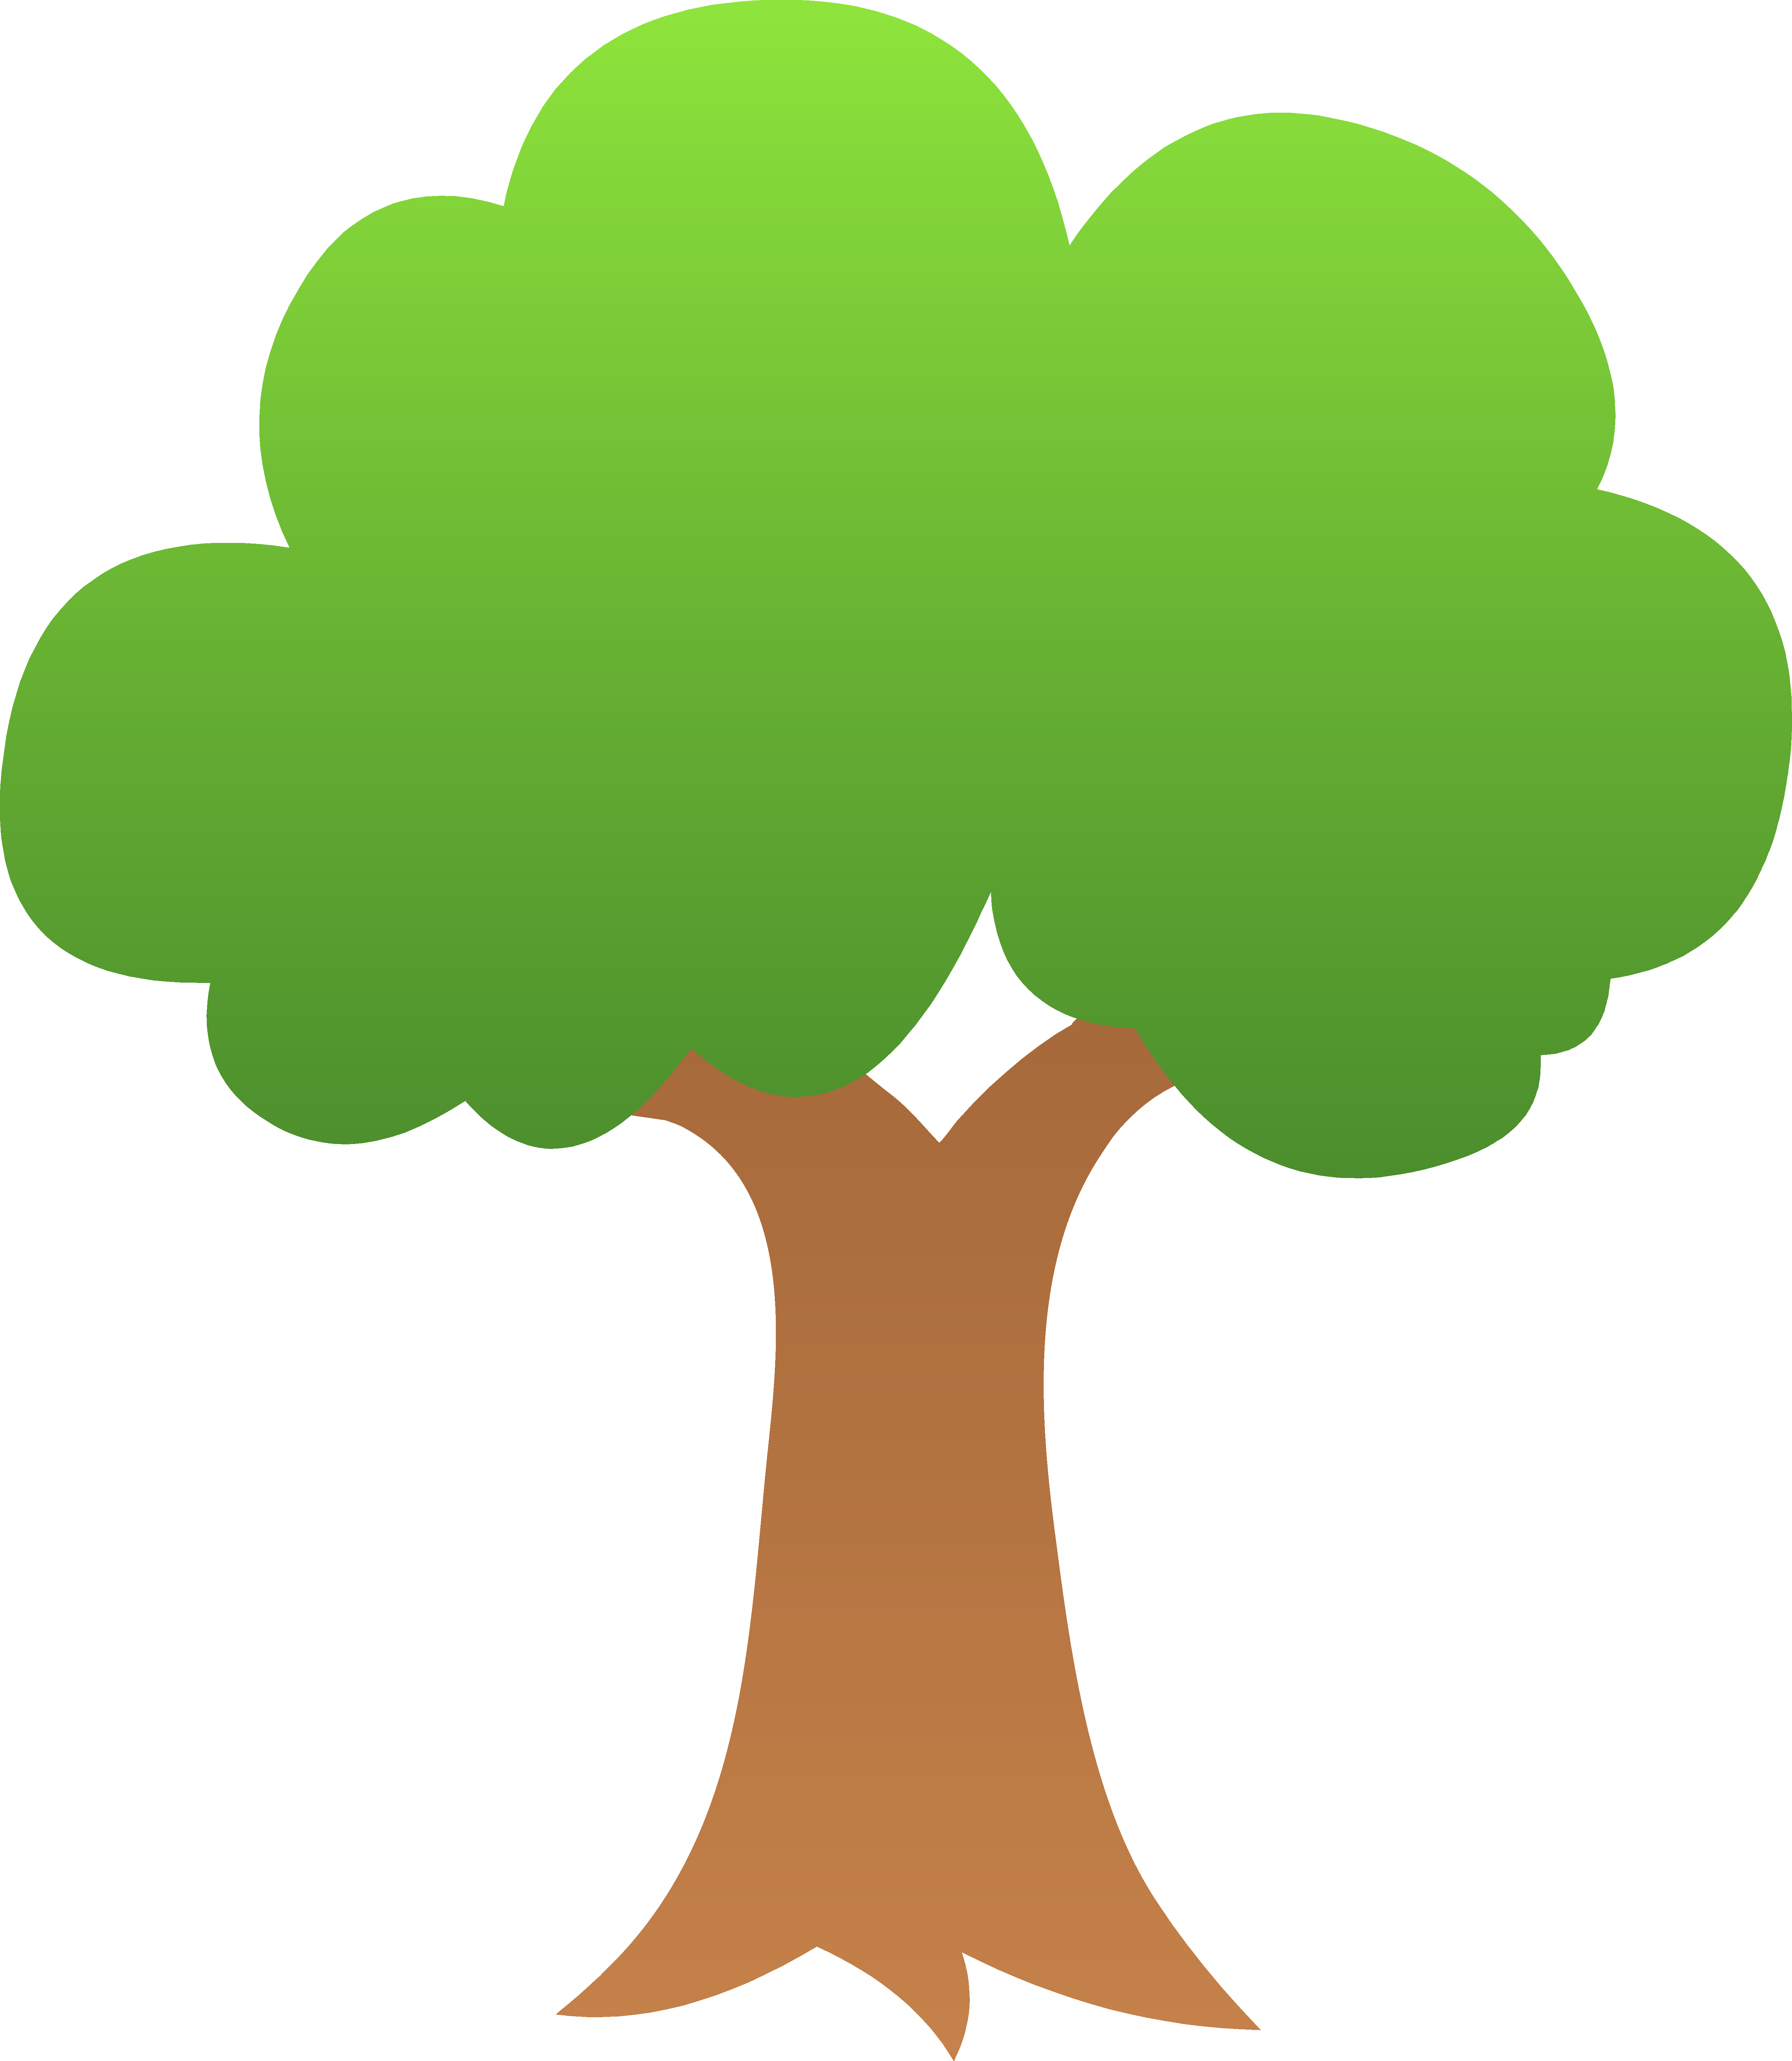 Free A Cartoon Tree, Download Free A Cartoon Tree png images, Free